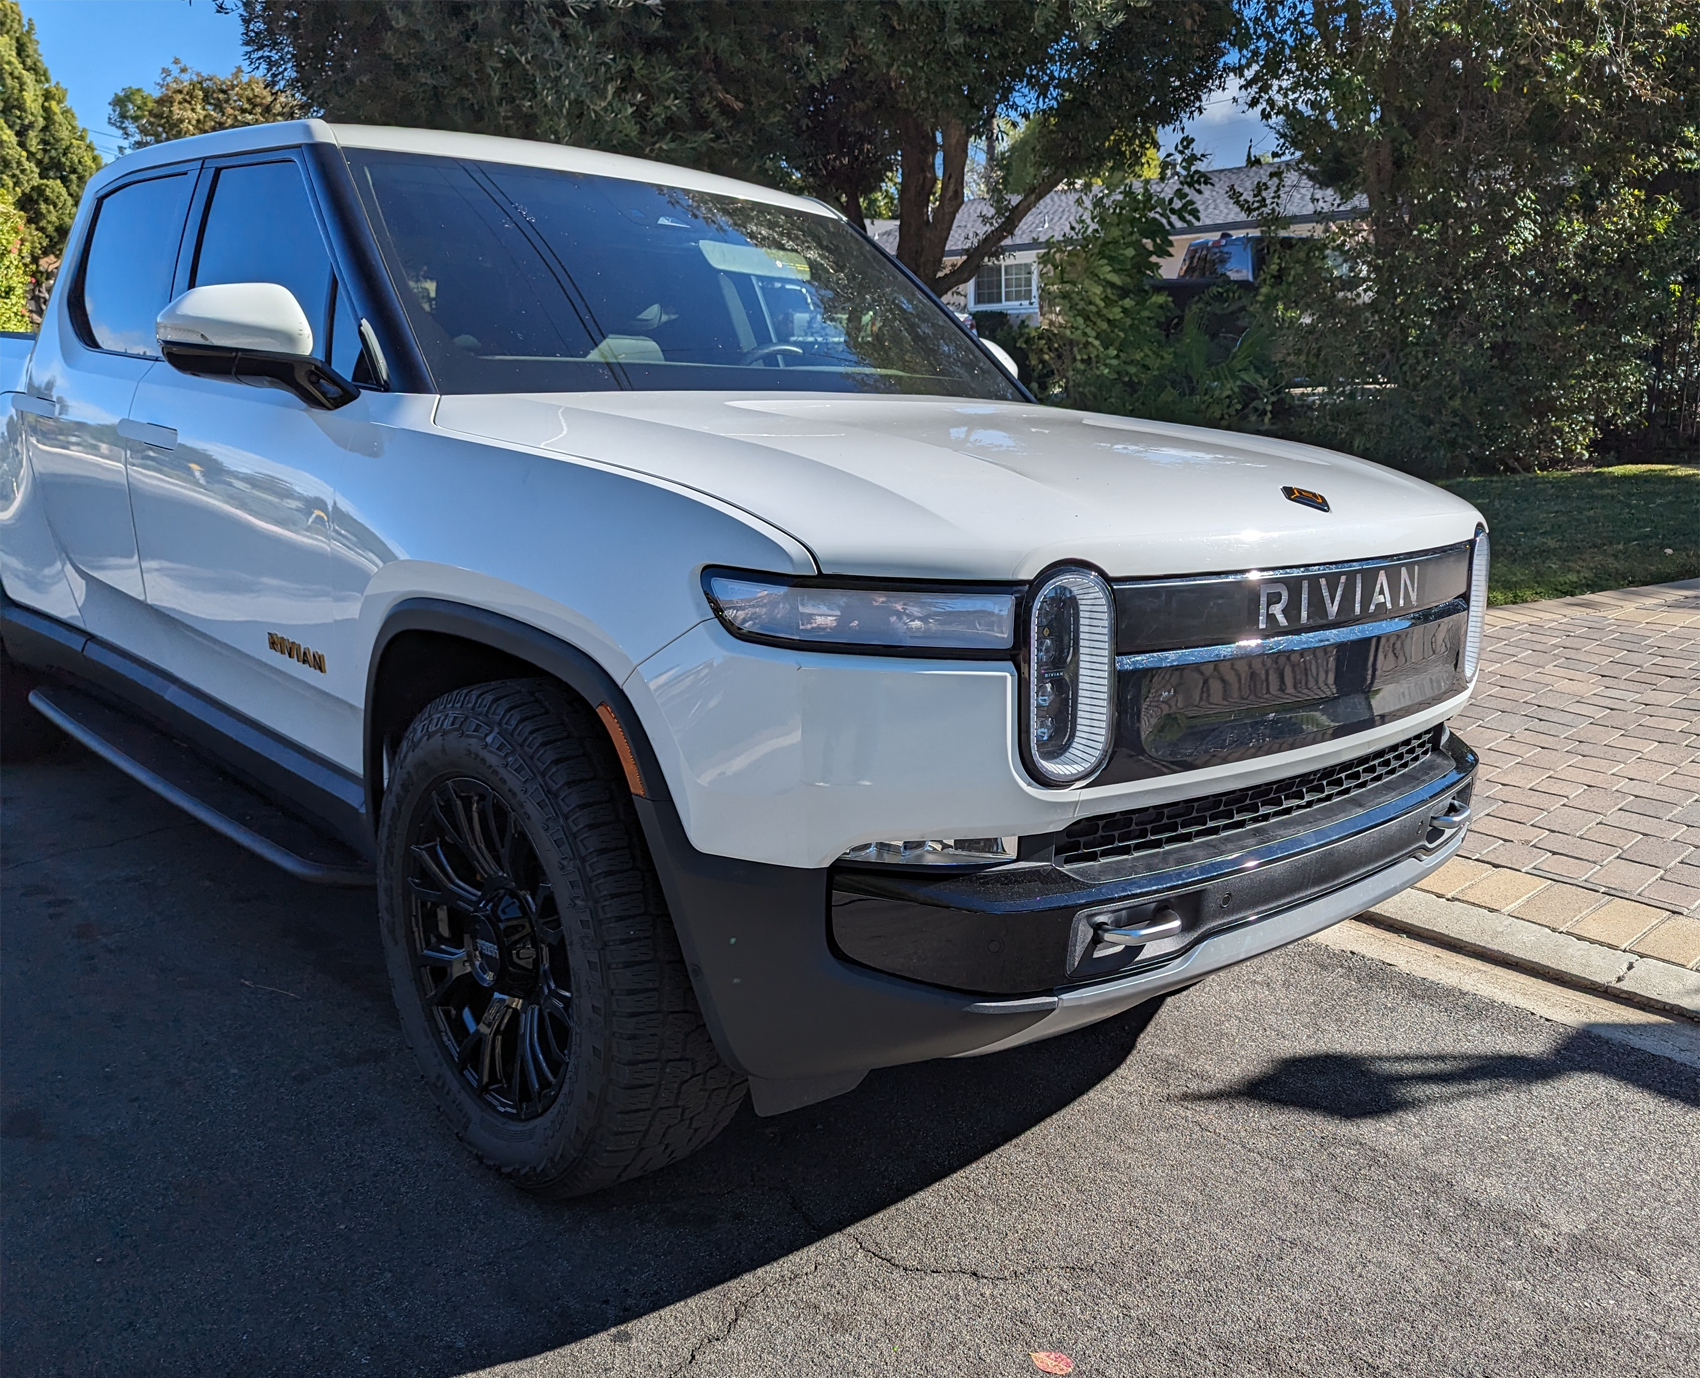 Rivian R1T R1S UPDATE: Blackout lightbar decal added + applied vinyl to break up the controversial front end on my Rivian 1704653160192